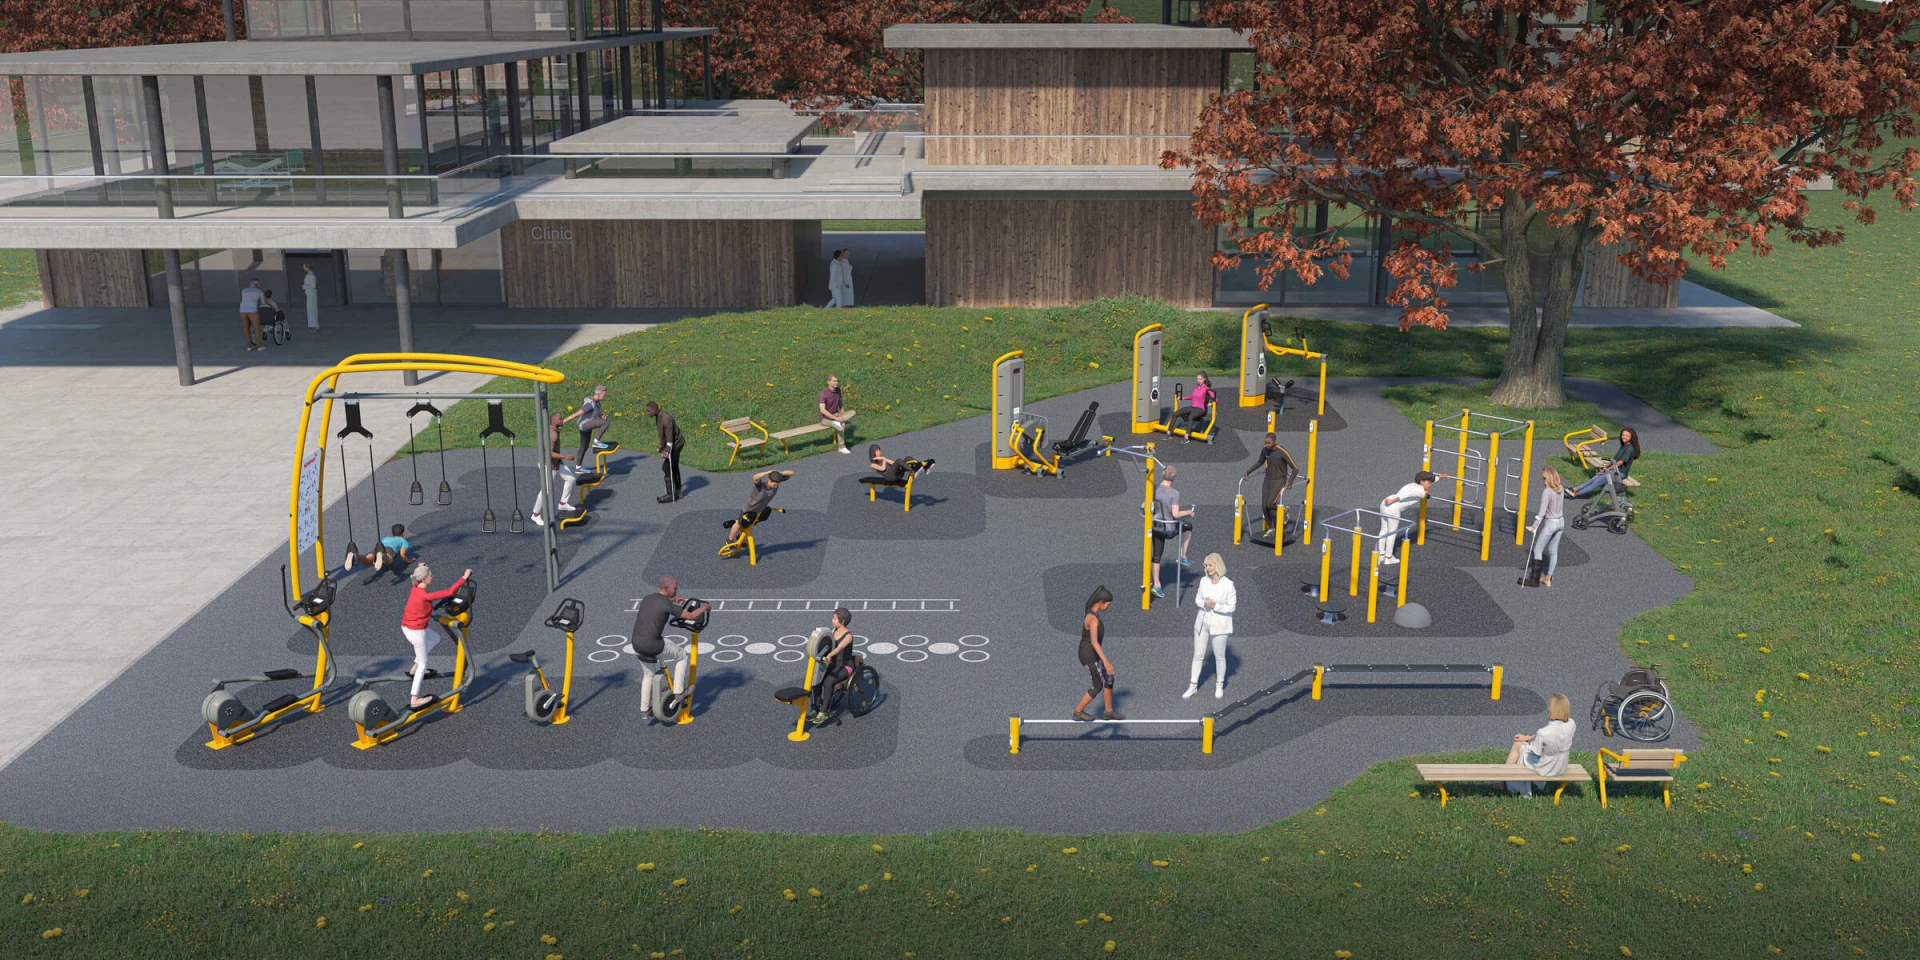 Concept design for an injury prevention fitness area